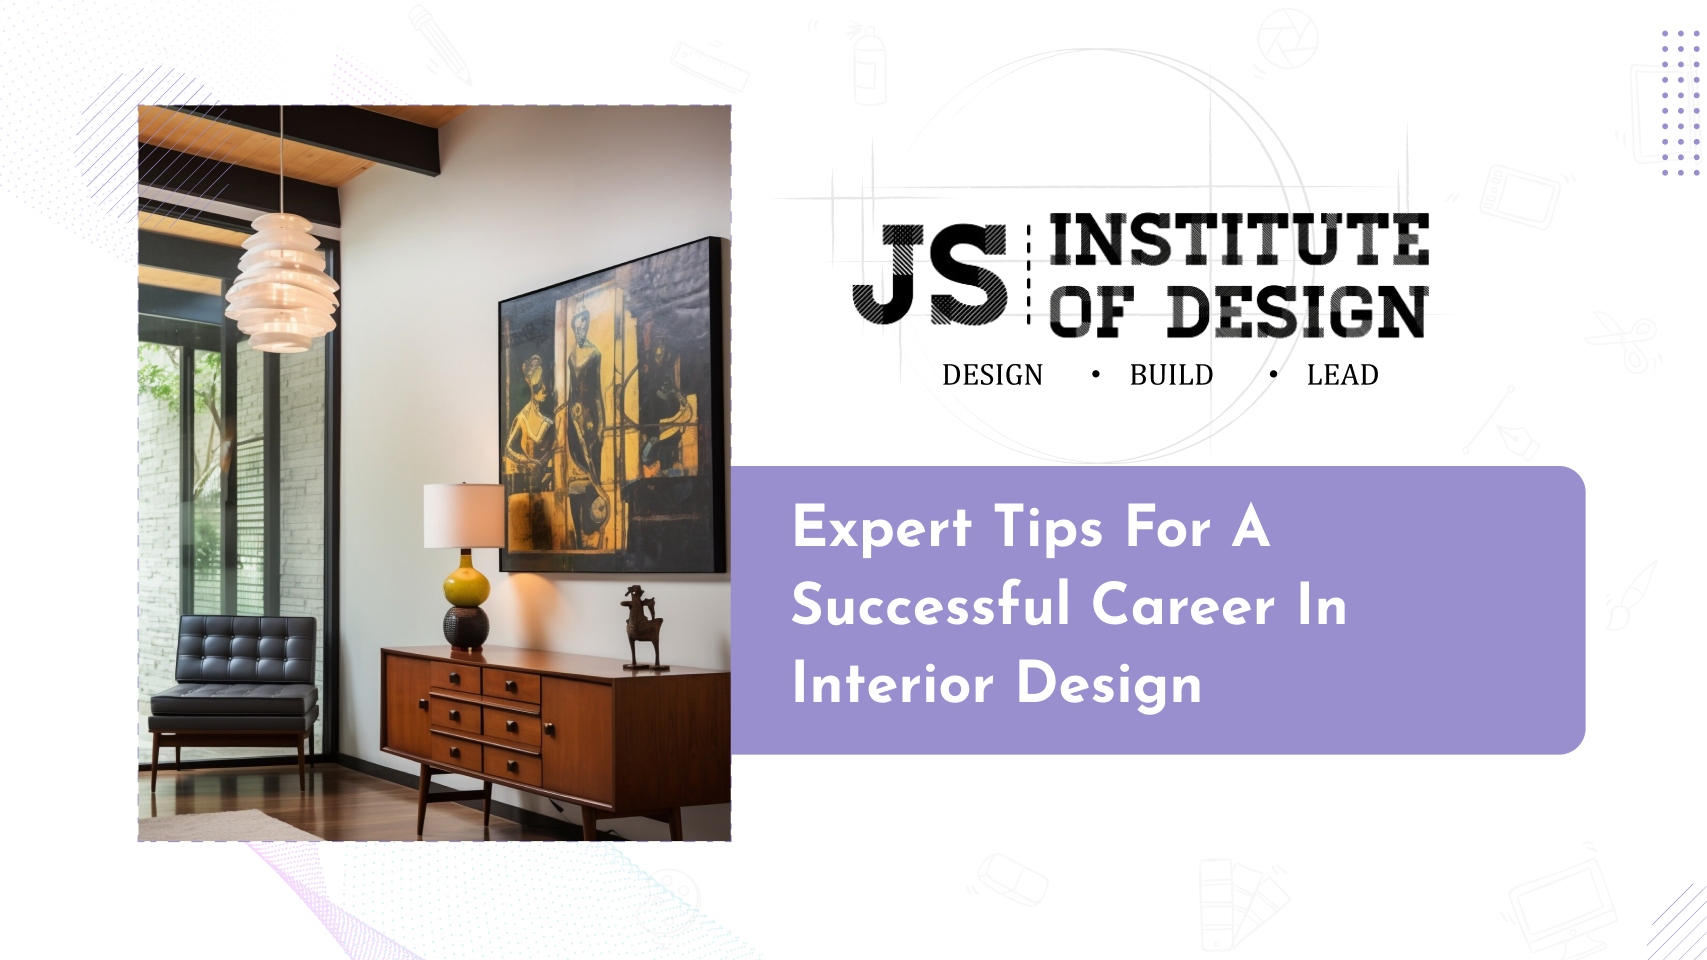 Expert Tips for a Successful Career in Interior Design